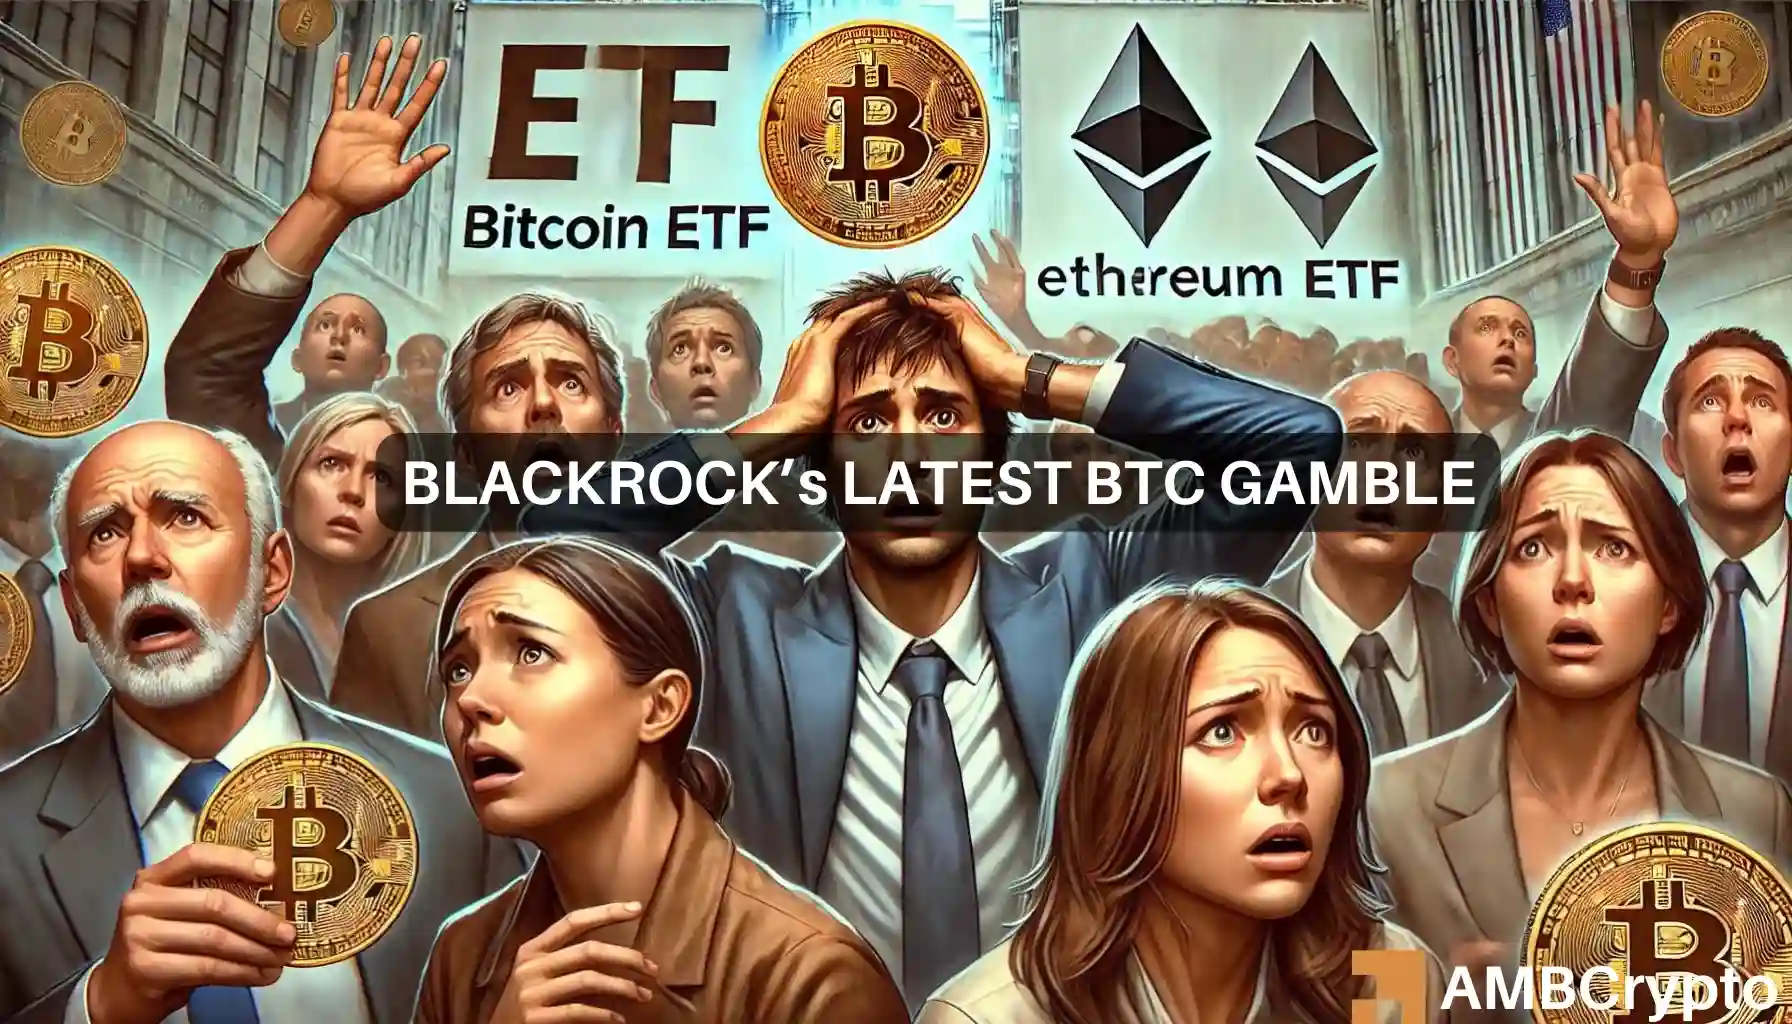 BlackRock makes a surprising move as Bitcoin reacts – All the details